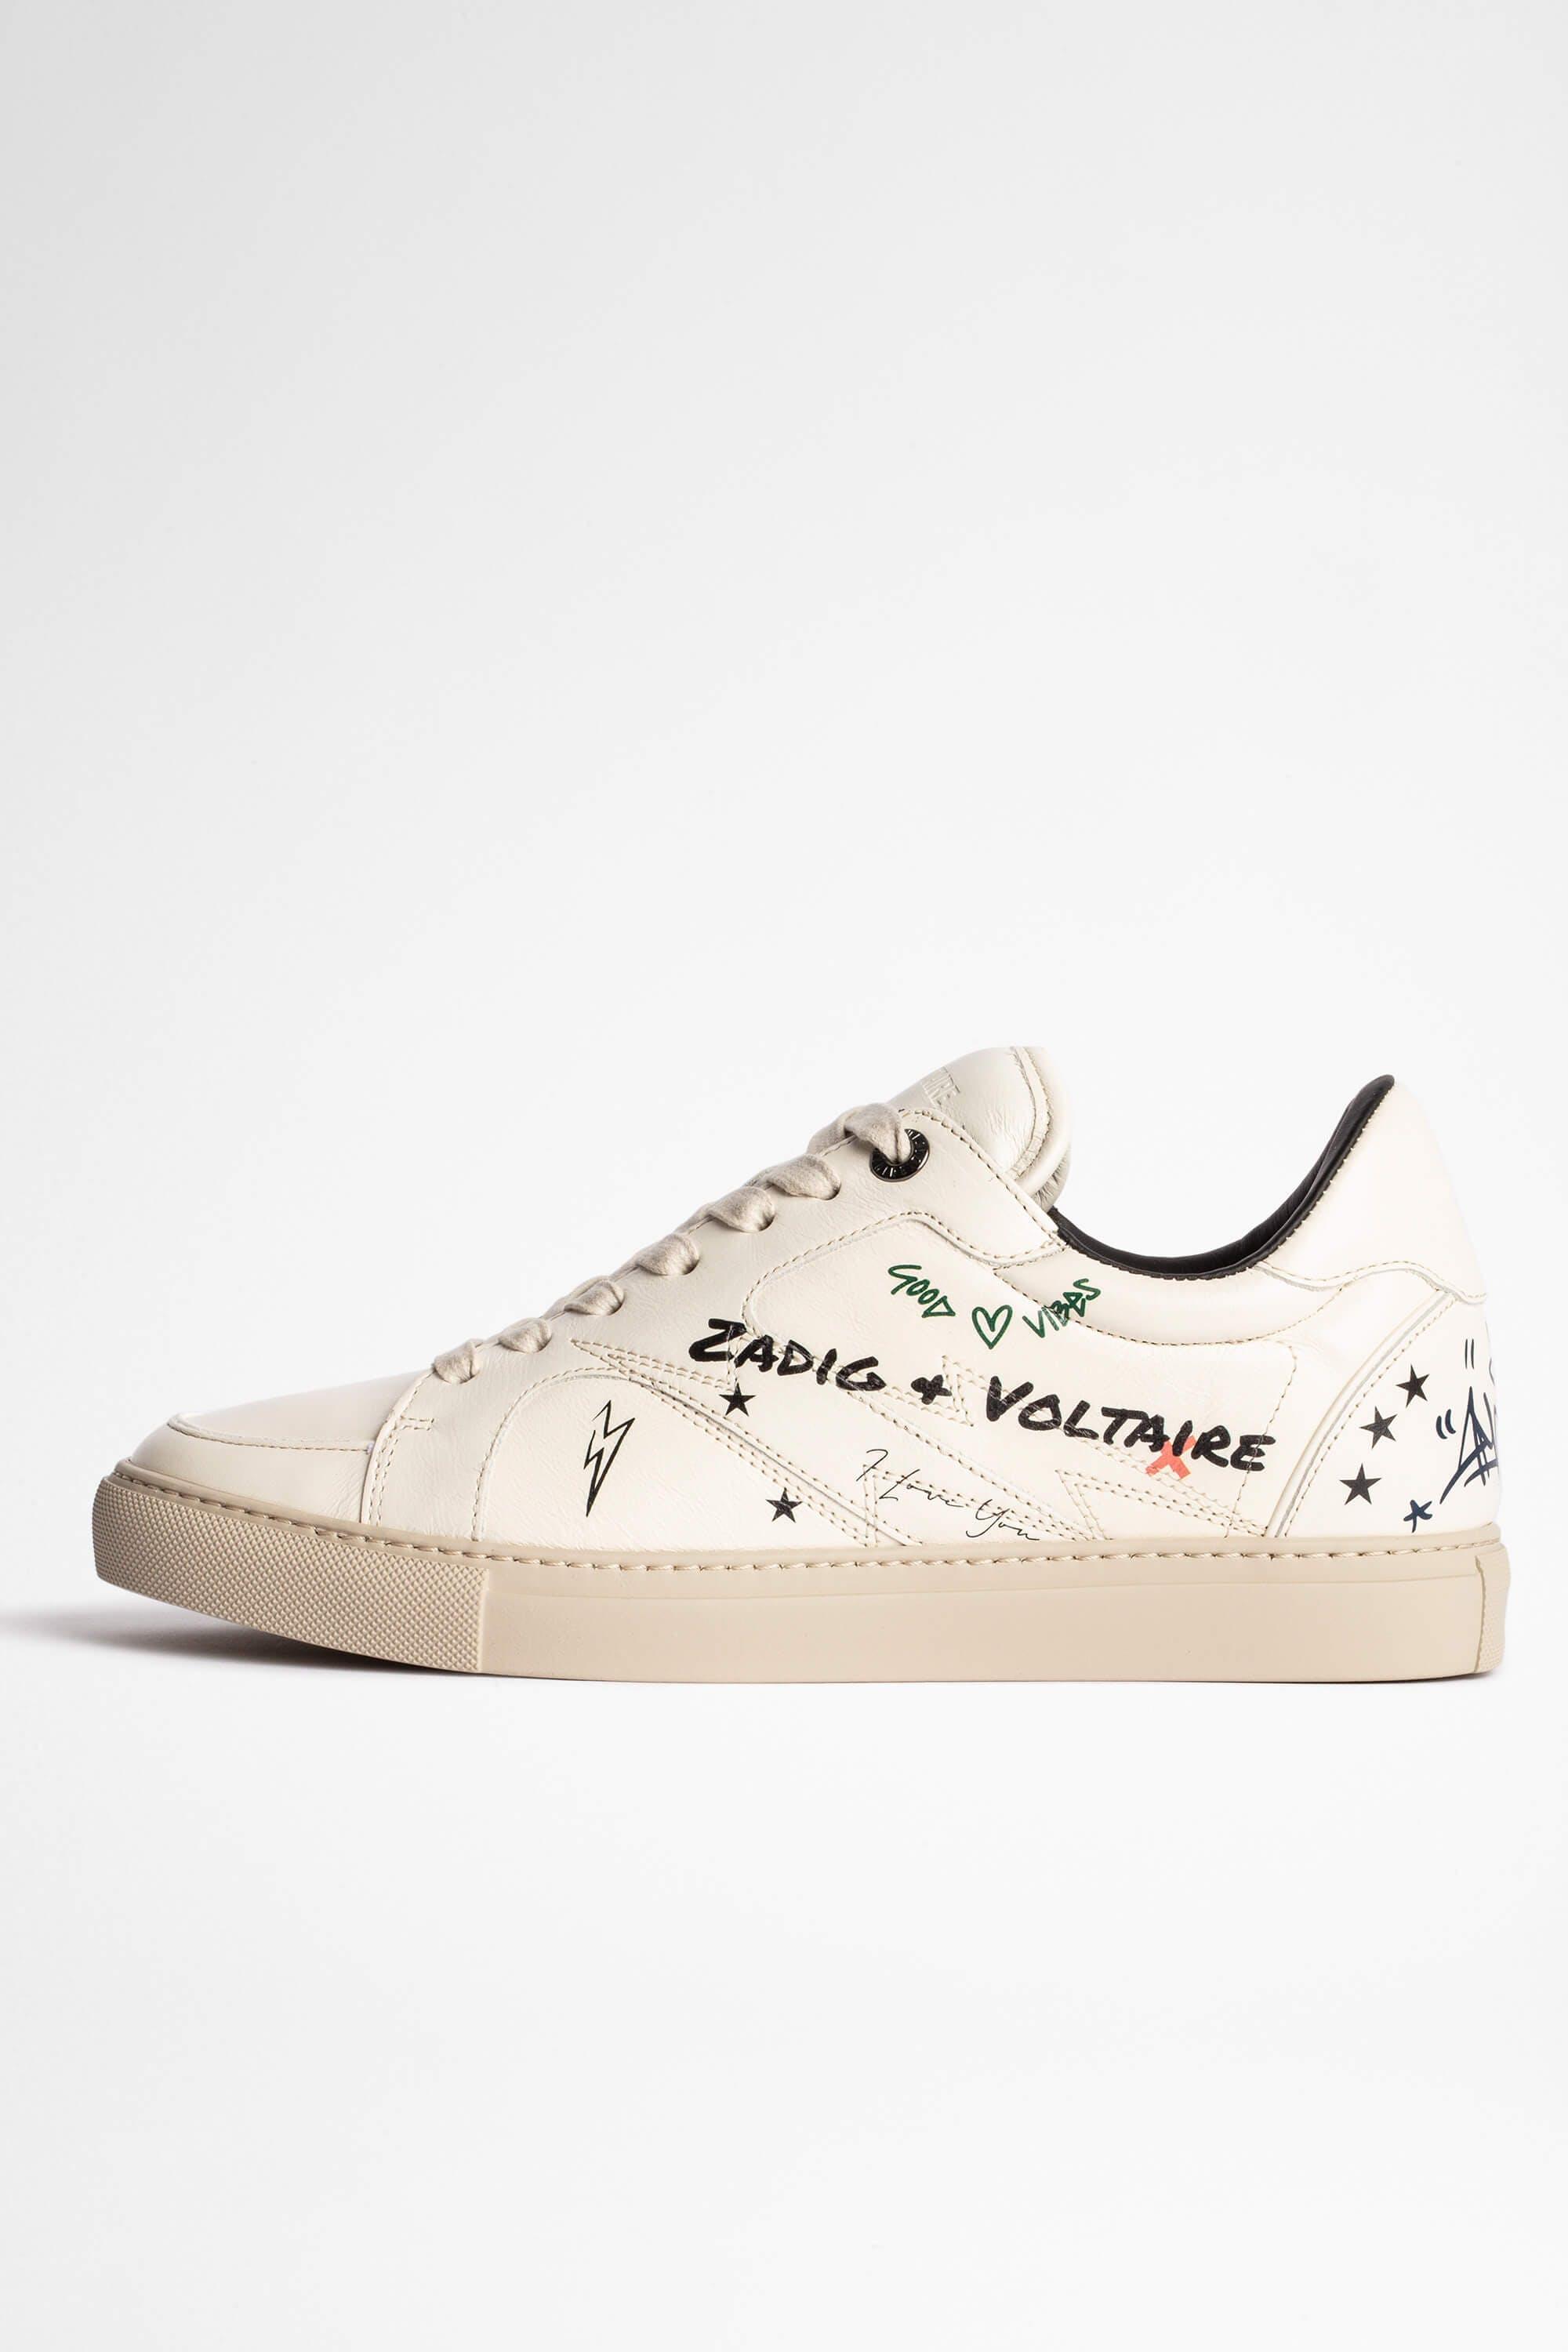 Zadig & Voltaire Zv1747 Board Crush Sneakers Leather in White | Lyst